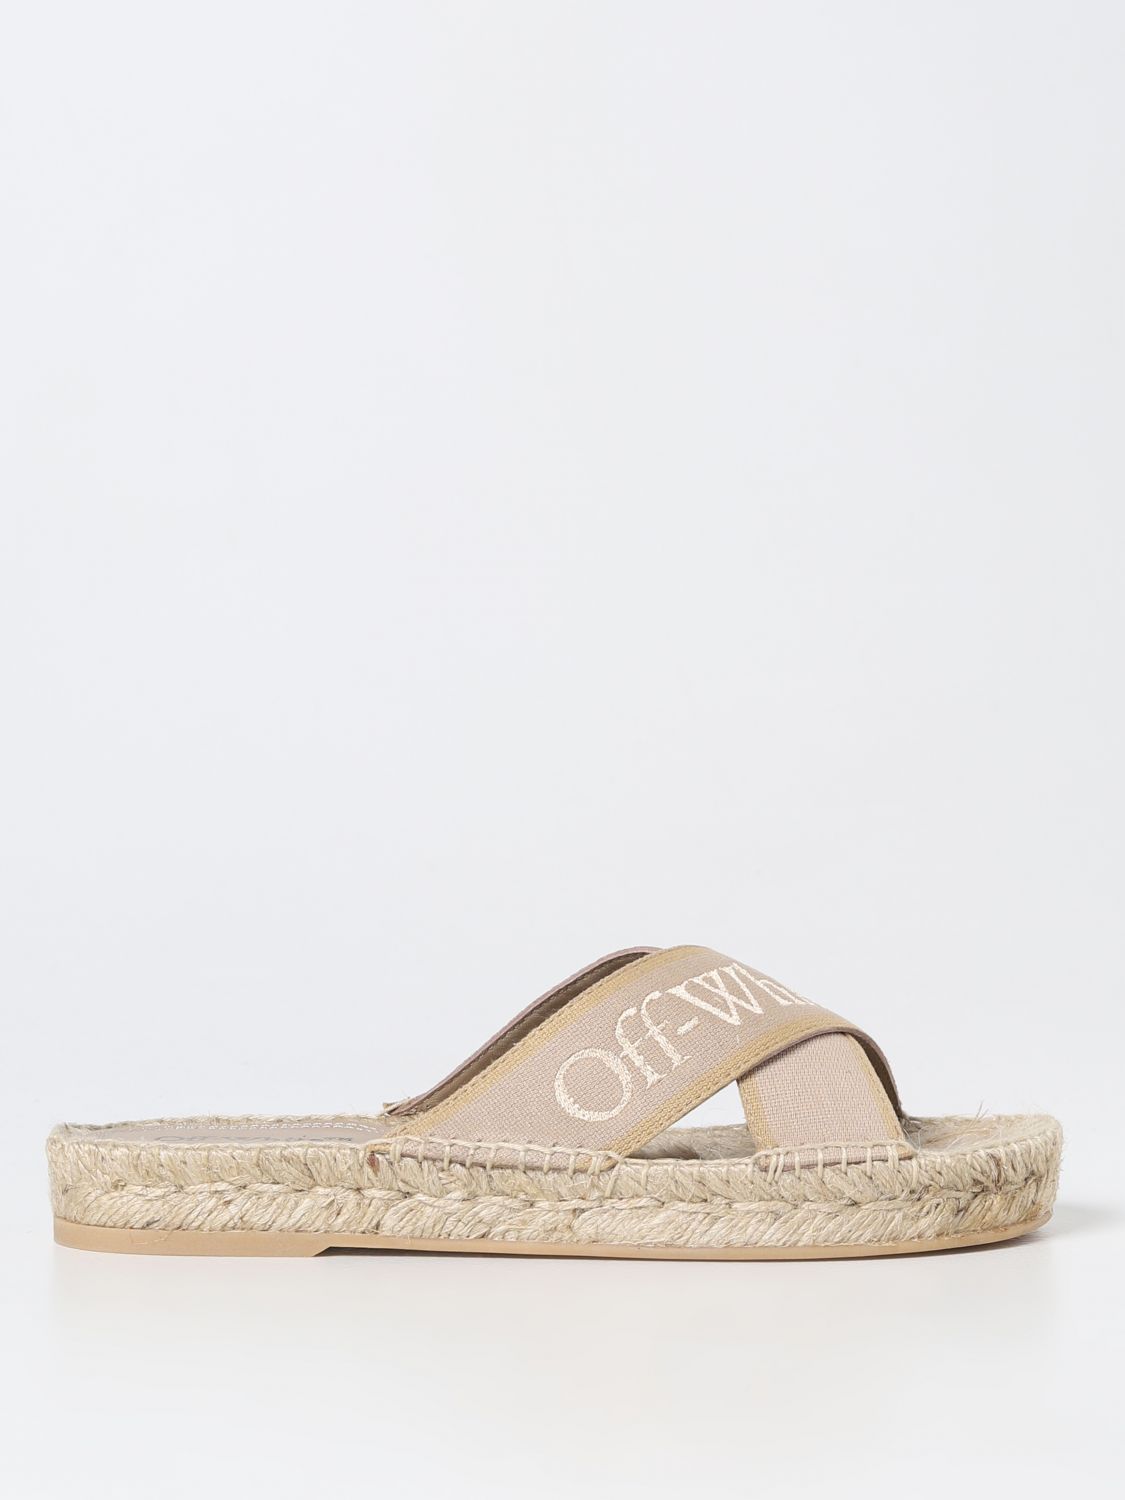 OFF-WHITE SANDALS IN FABRIC AND RAFFIA,380047022